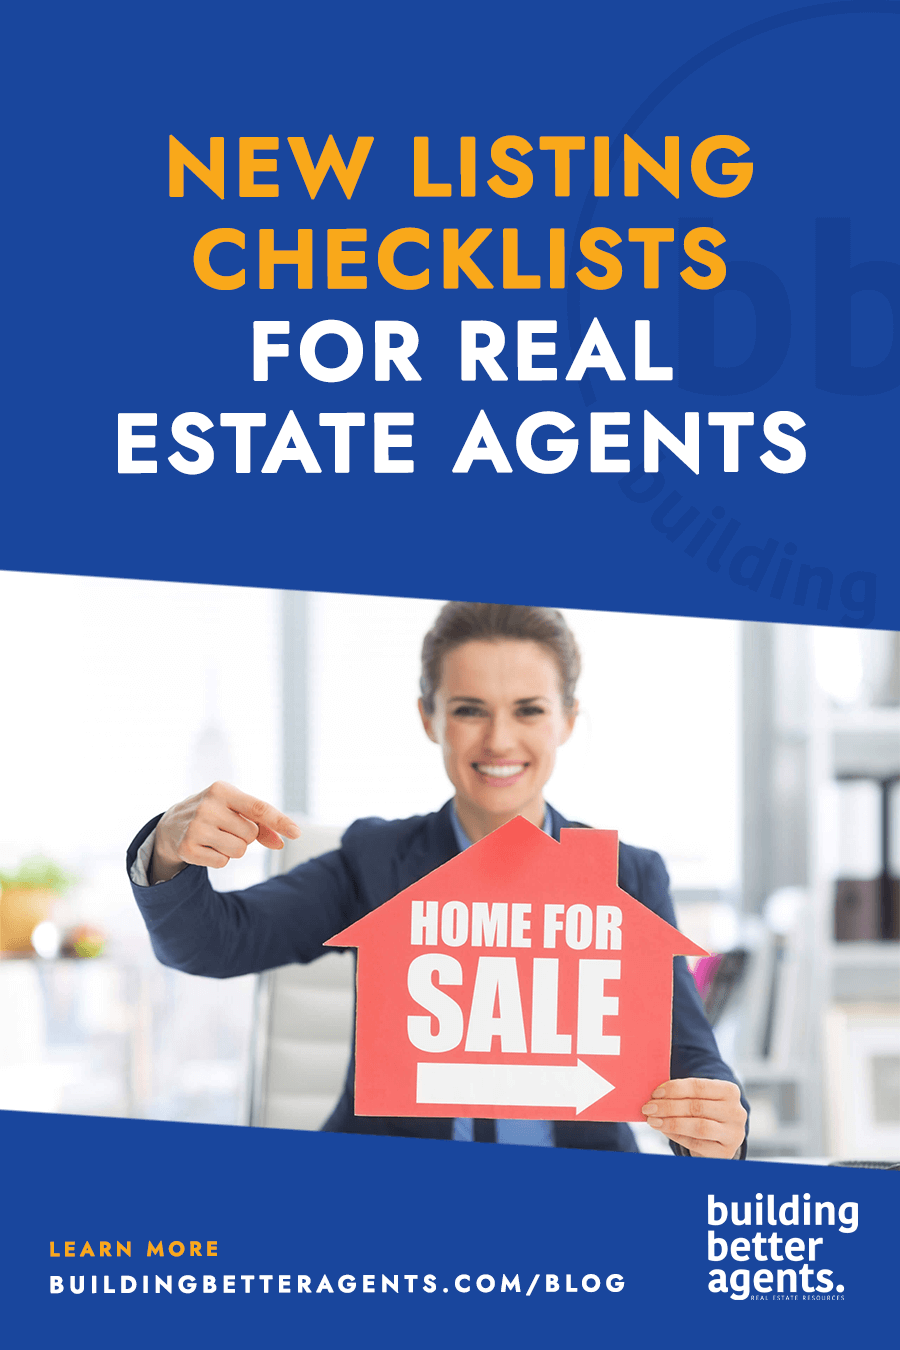 Marketing Checklist for Your New Real Estate Listing